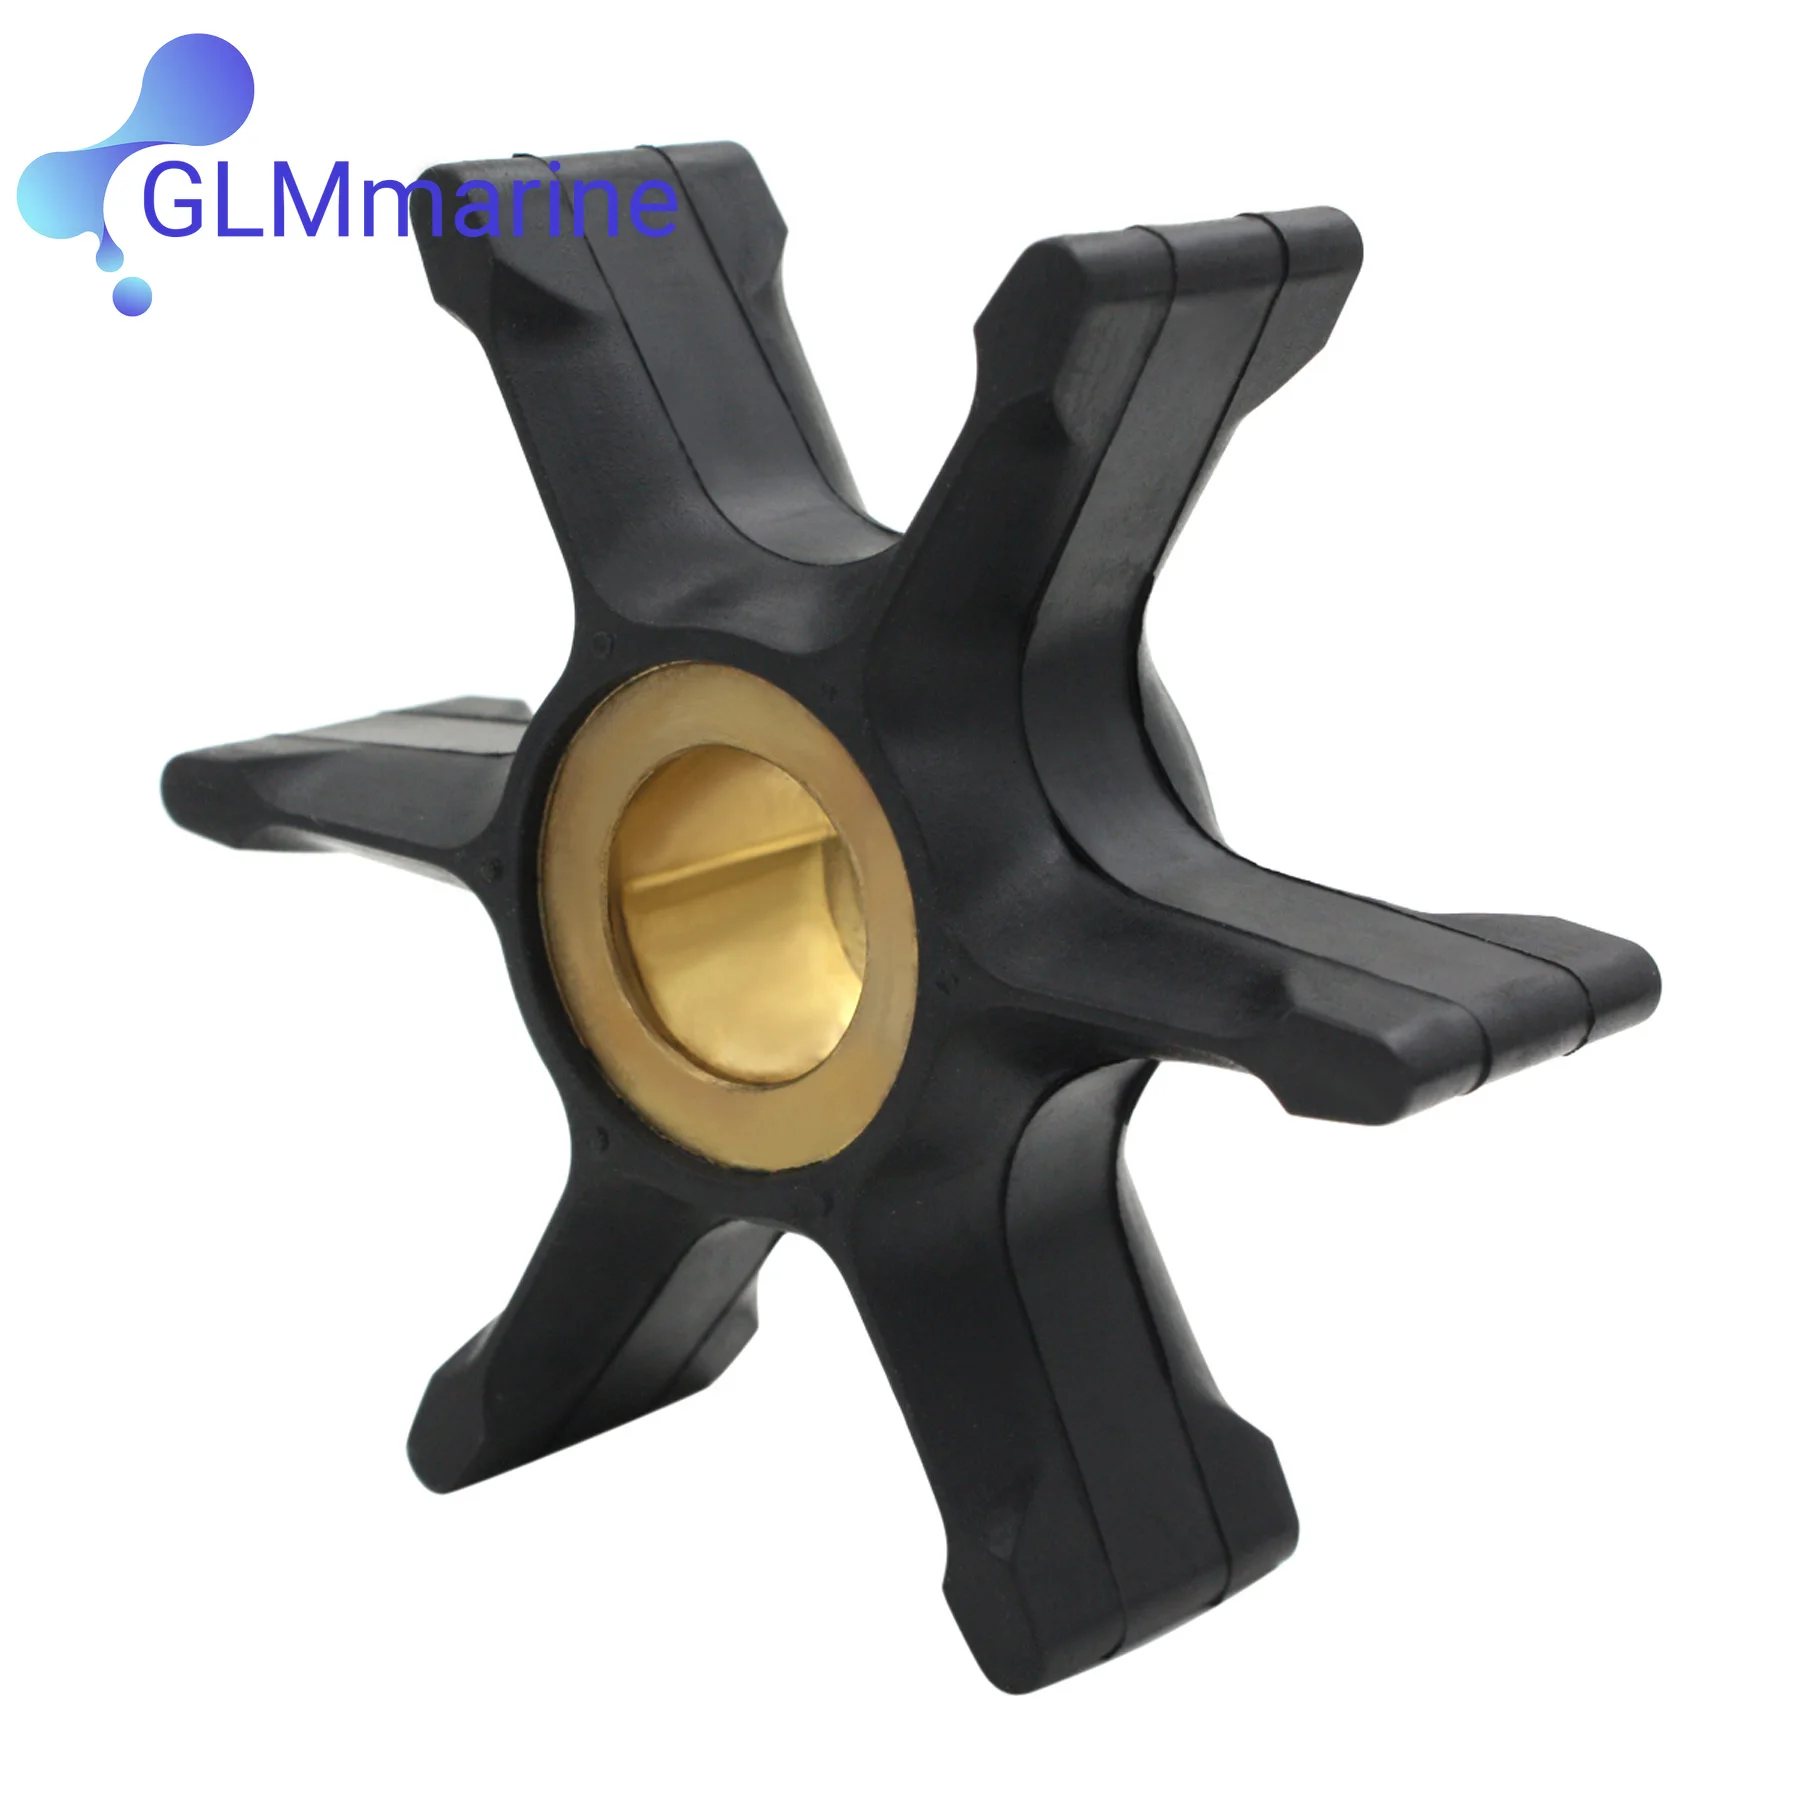 Water Pump Impeller 396725 389557 For Johnson Evinrude E J 28 40 50 55 60 65 70 75 HP Outboard Motor Parts 432954 437080 18-3053